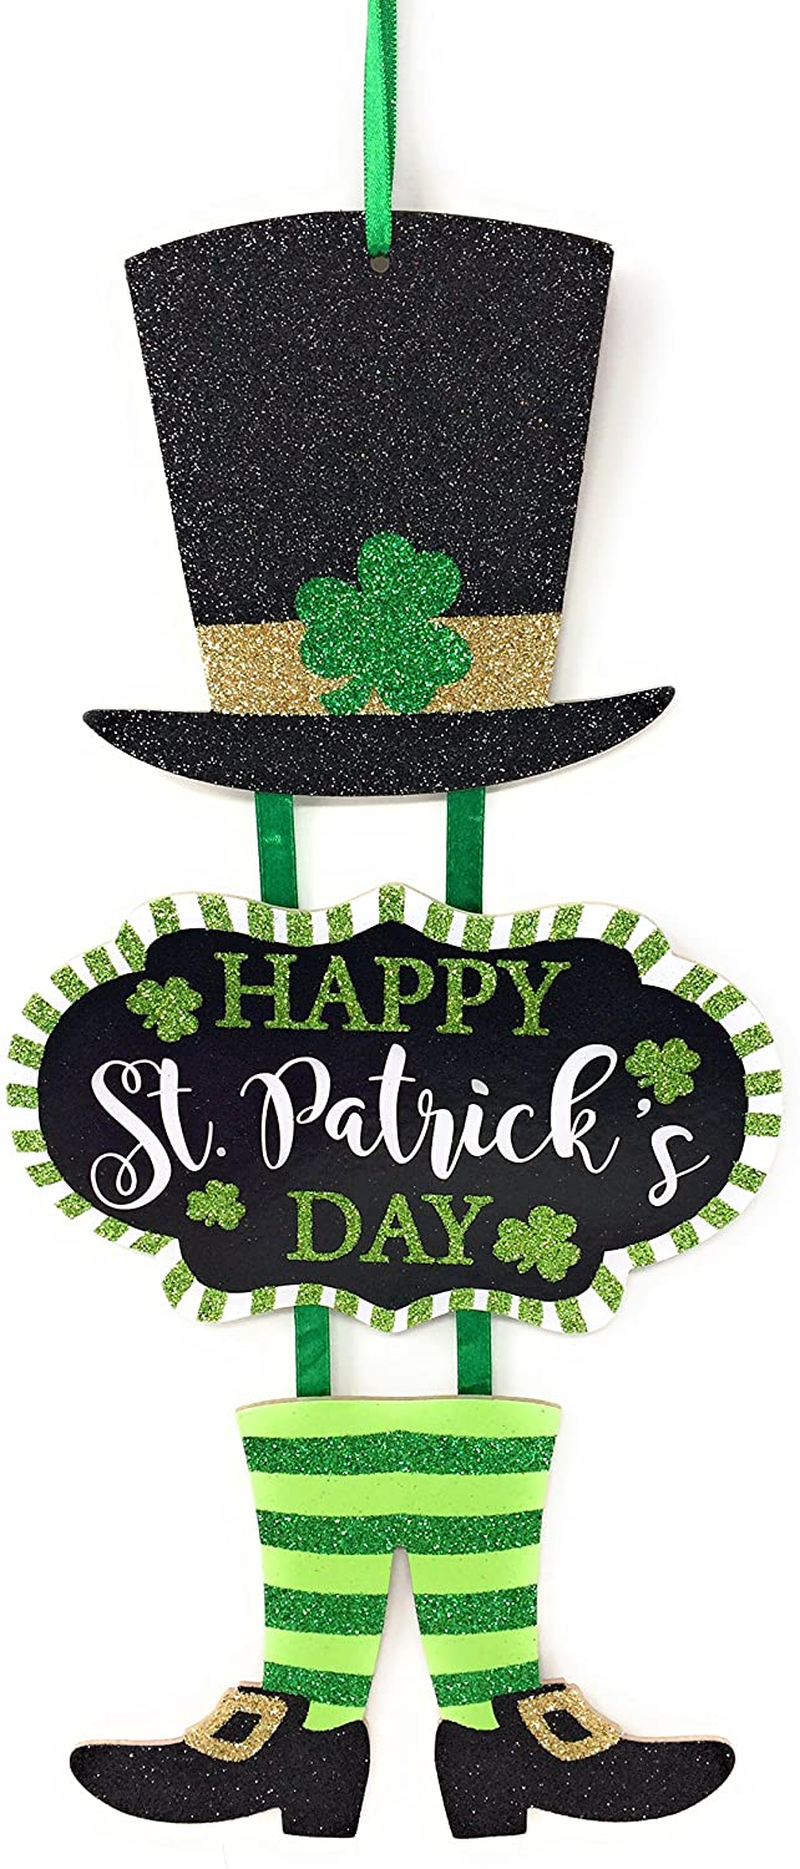 Glittery "Happy St. Patrick'S Day" Themed Hanging Welcome Sign with Leprechaun Top Hat and Feet